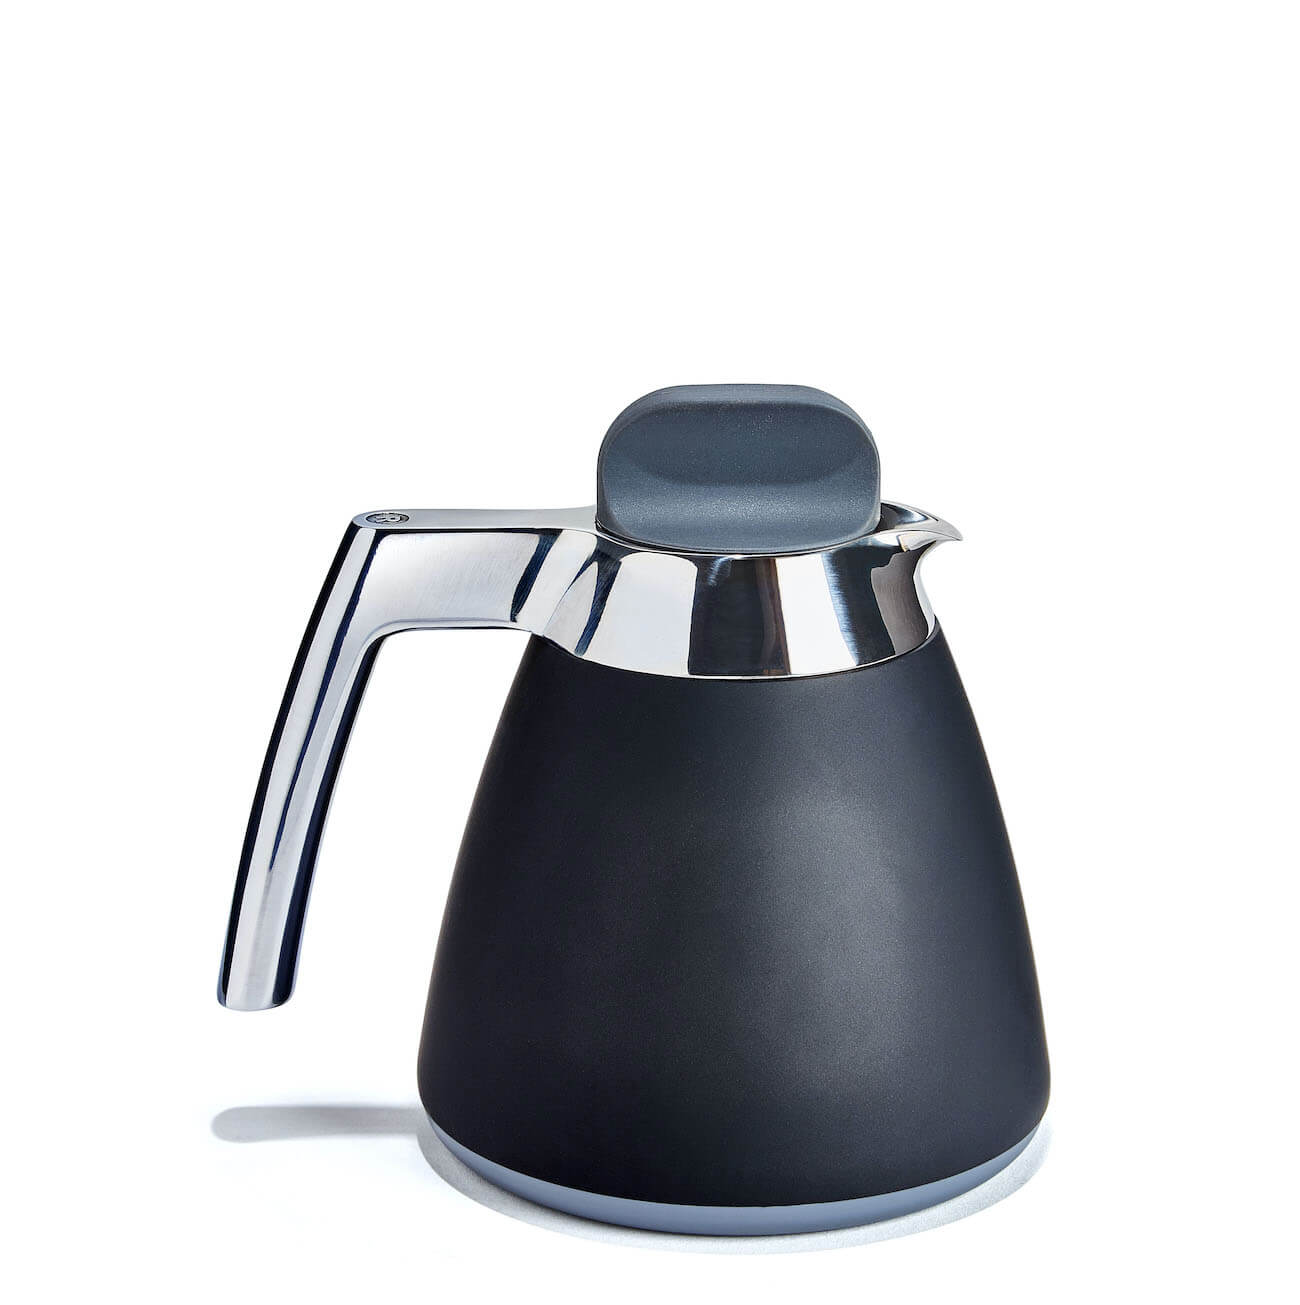 Ratio Eight Thermal Carafe & Dripper